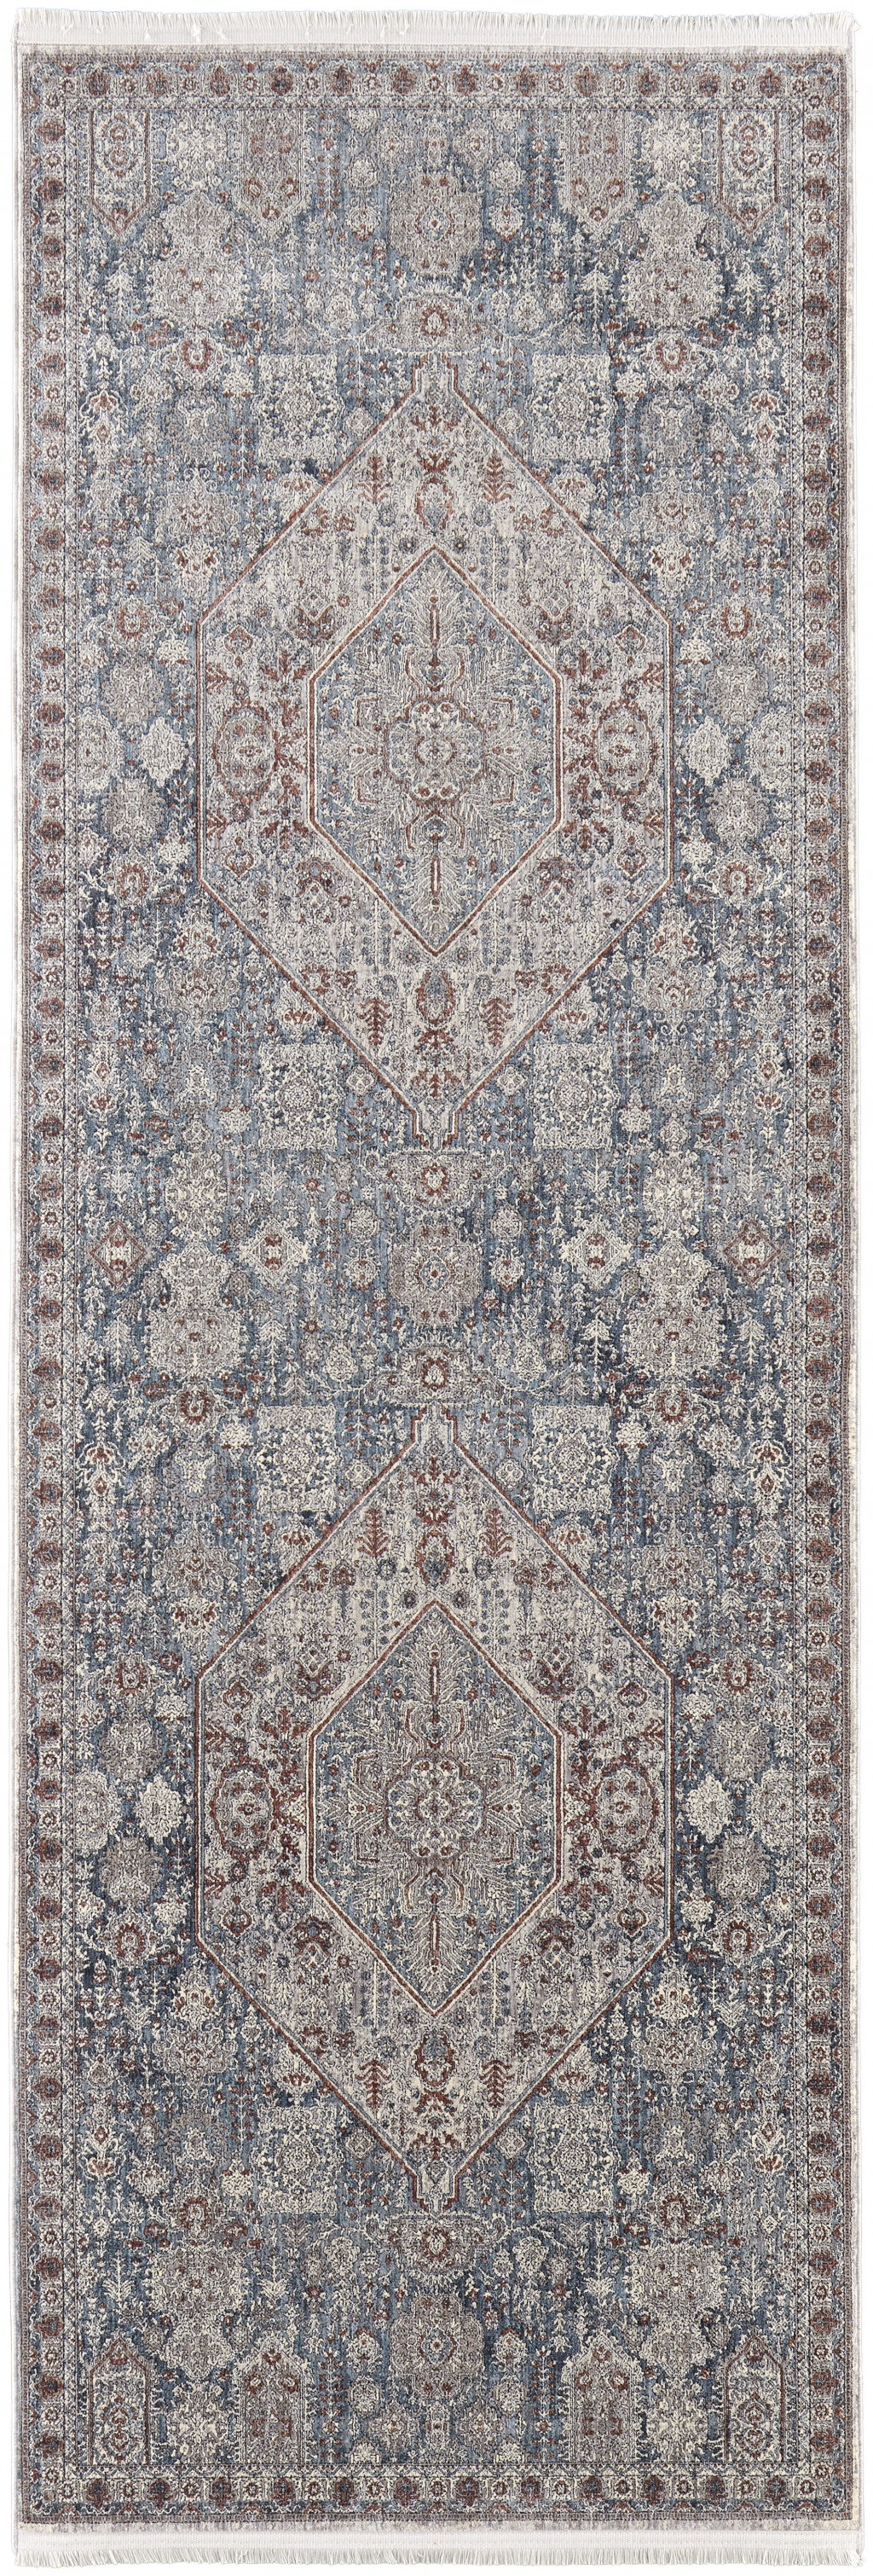 8' Blue And Ivory Floral Power Loom Stain Resistant Runner Rug-514478-1